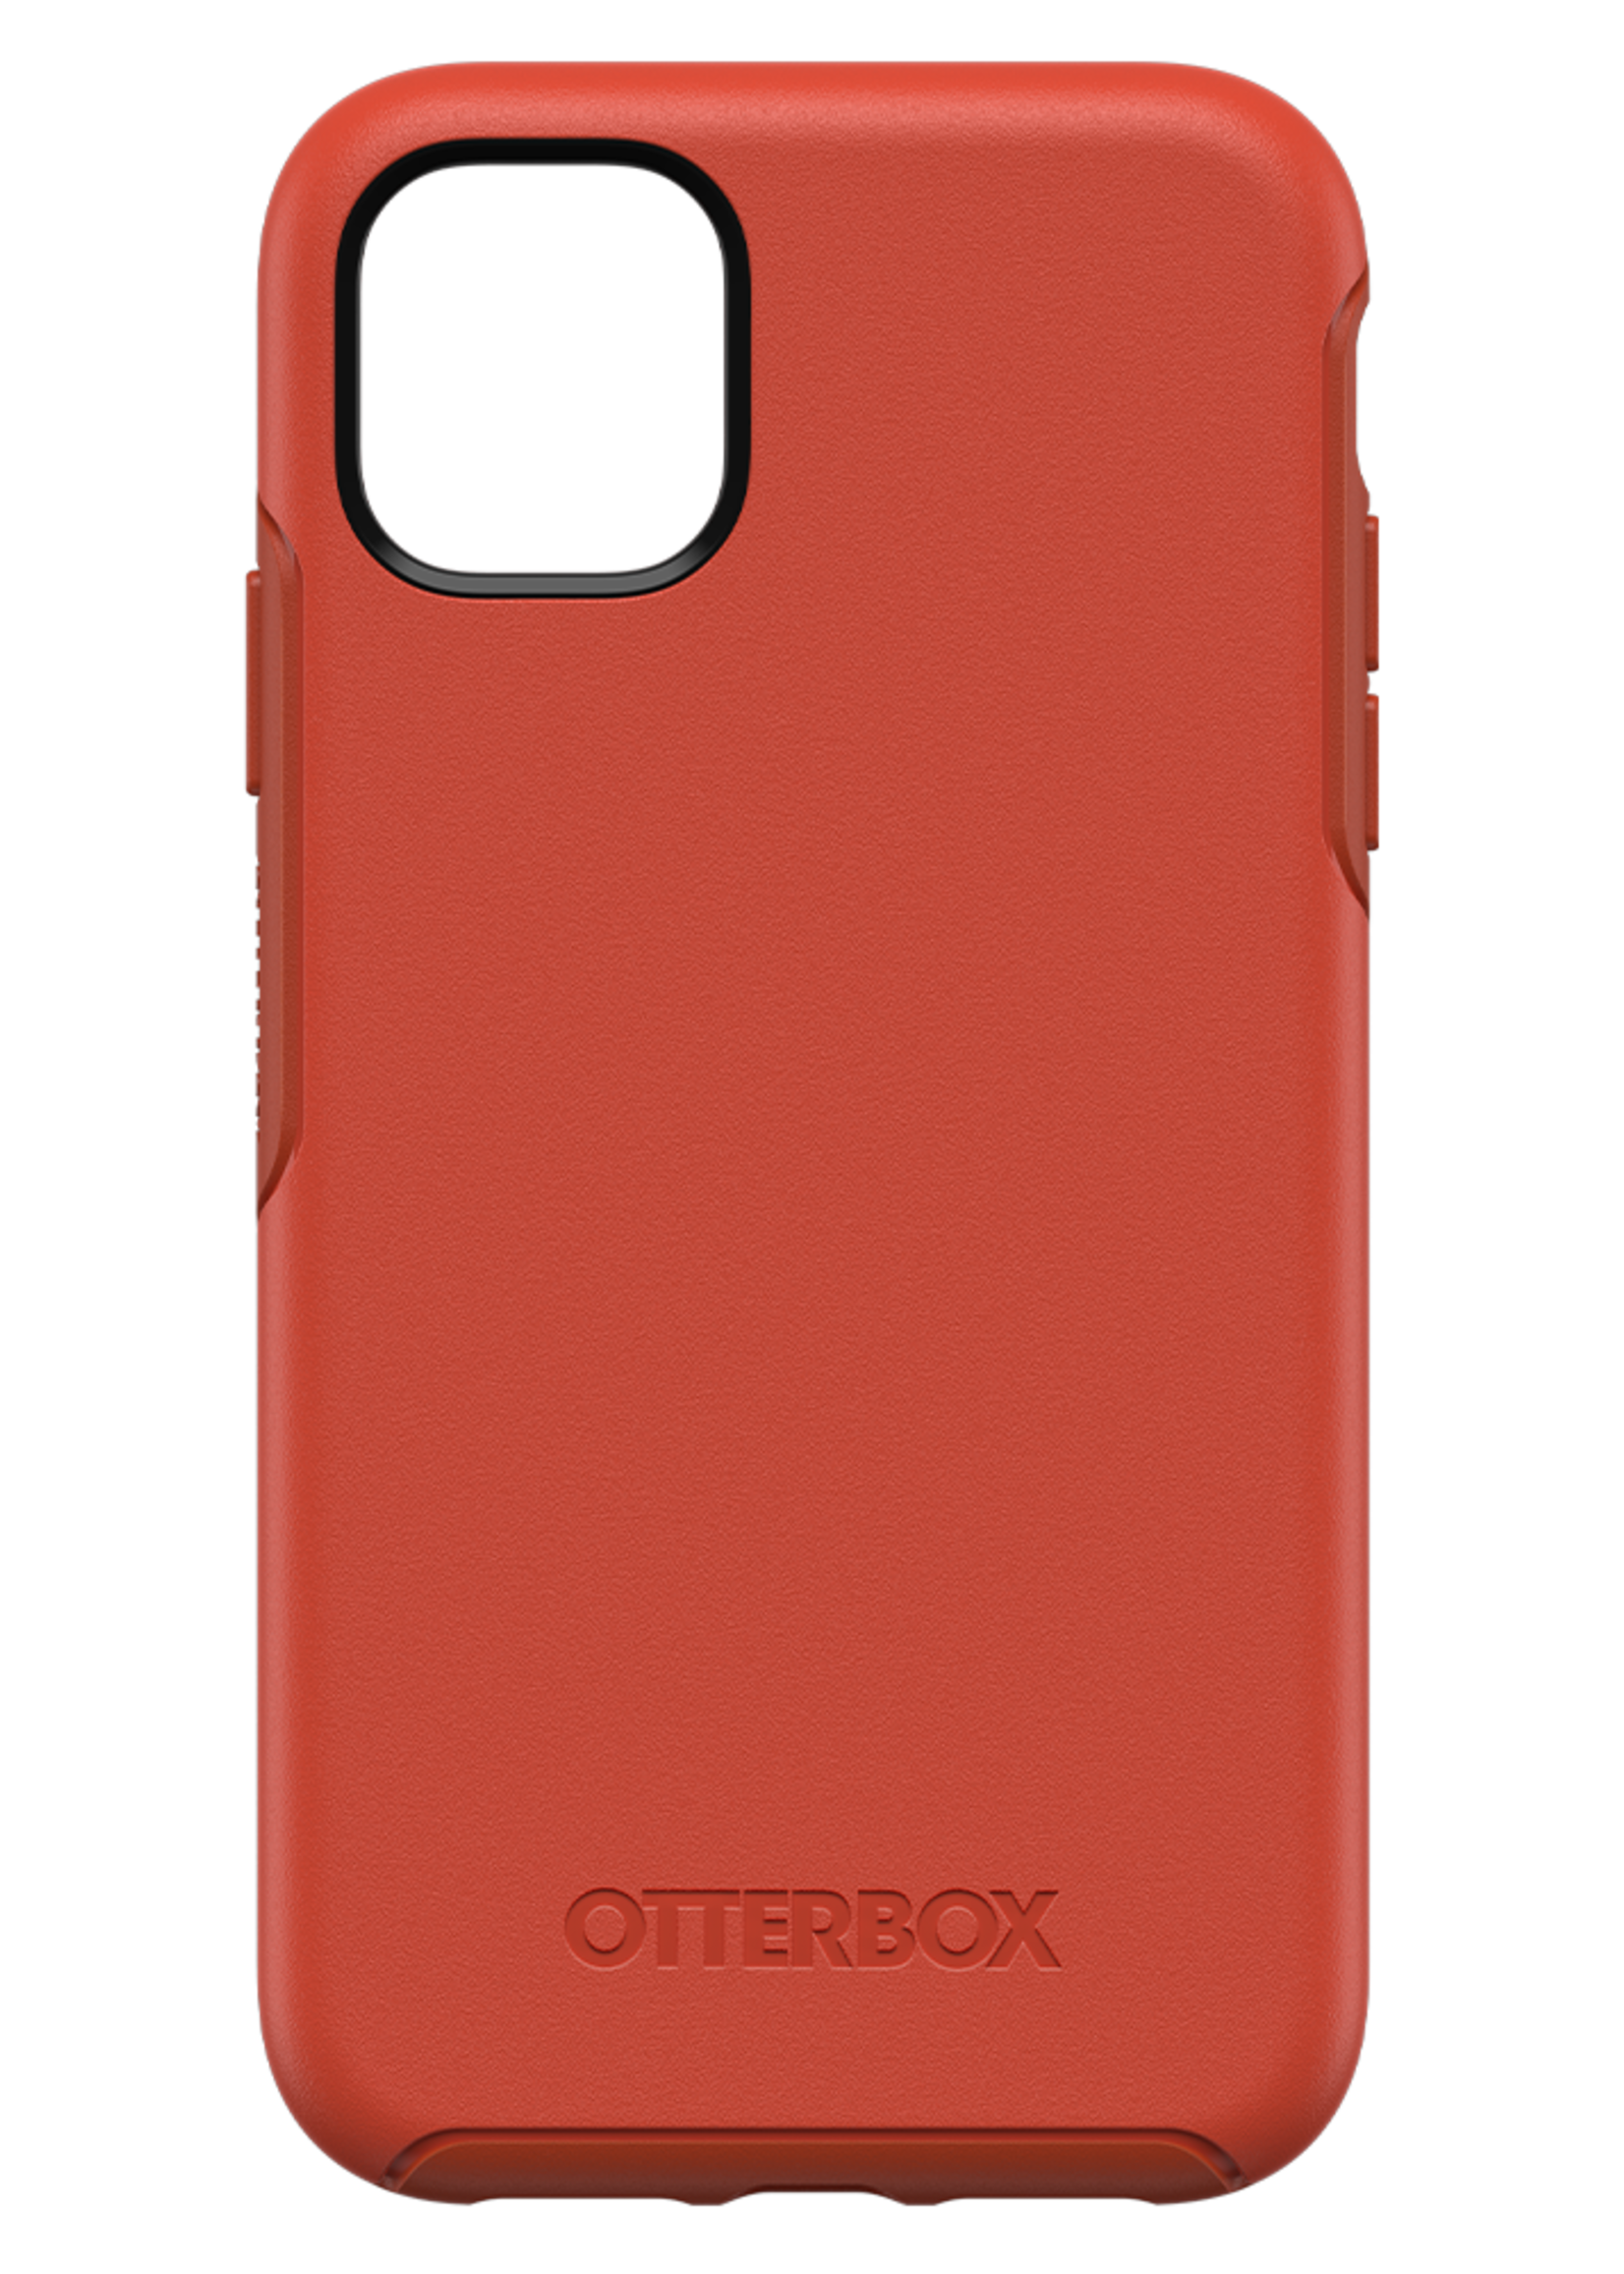 Otterbox OtterBox - Symmetry Case for Apple iPhone 11 - Risk Tiger